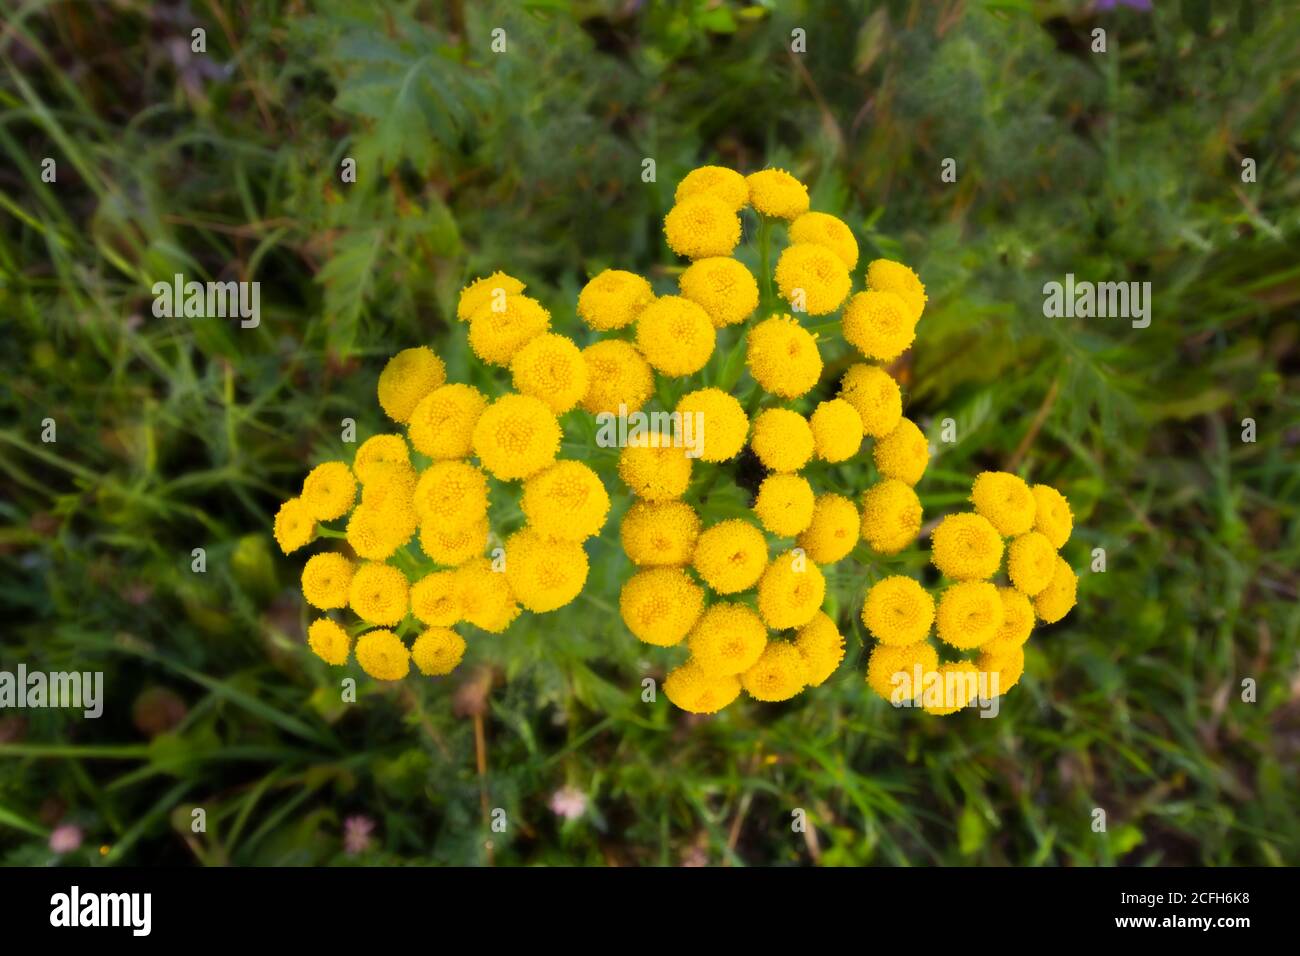 Closeup of yellow tansy flowers Tanacetum vulgare, common tansy, bitter button, cow bitter, or golden buttons. Wildflowers Stock Photo